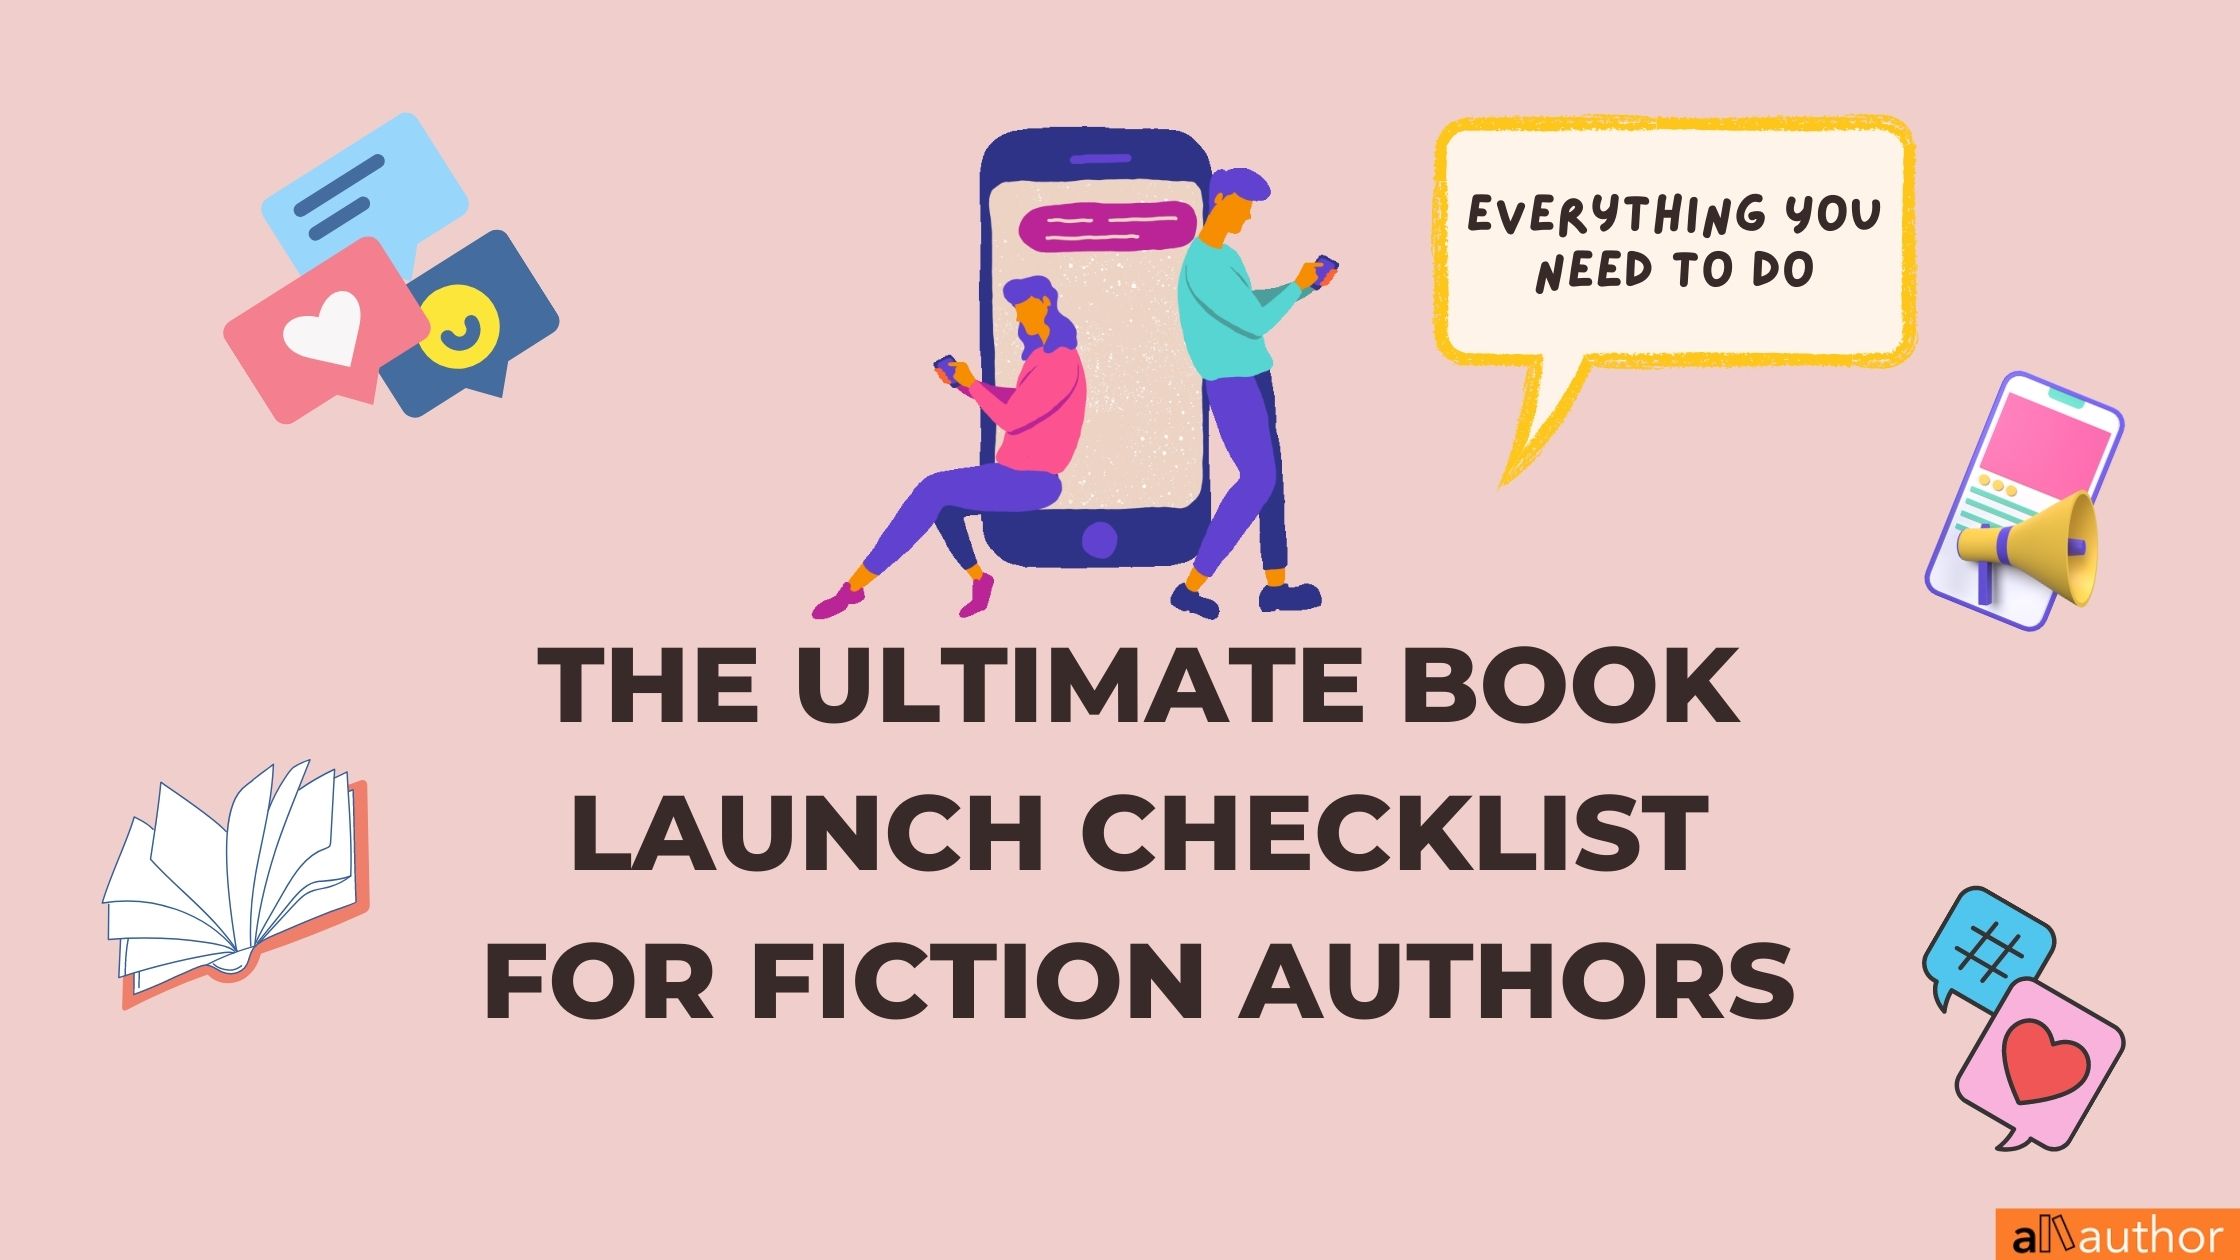 The Ultimate Book Launch Checklist for Fiction Authors